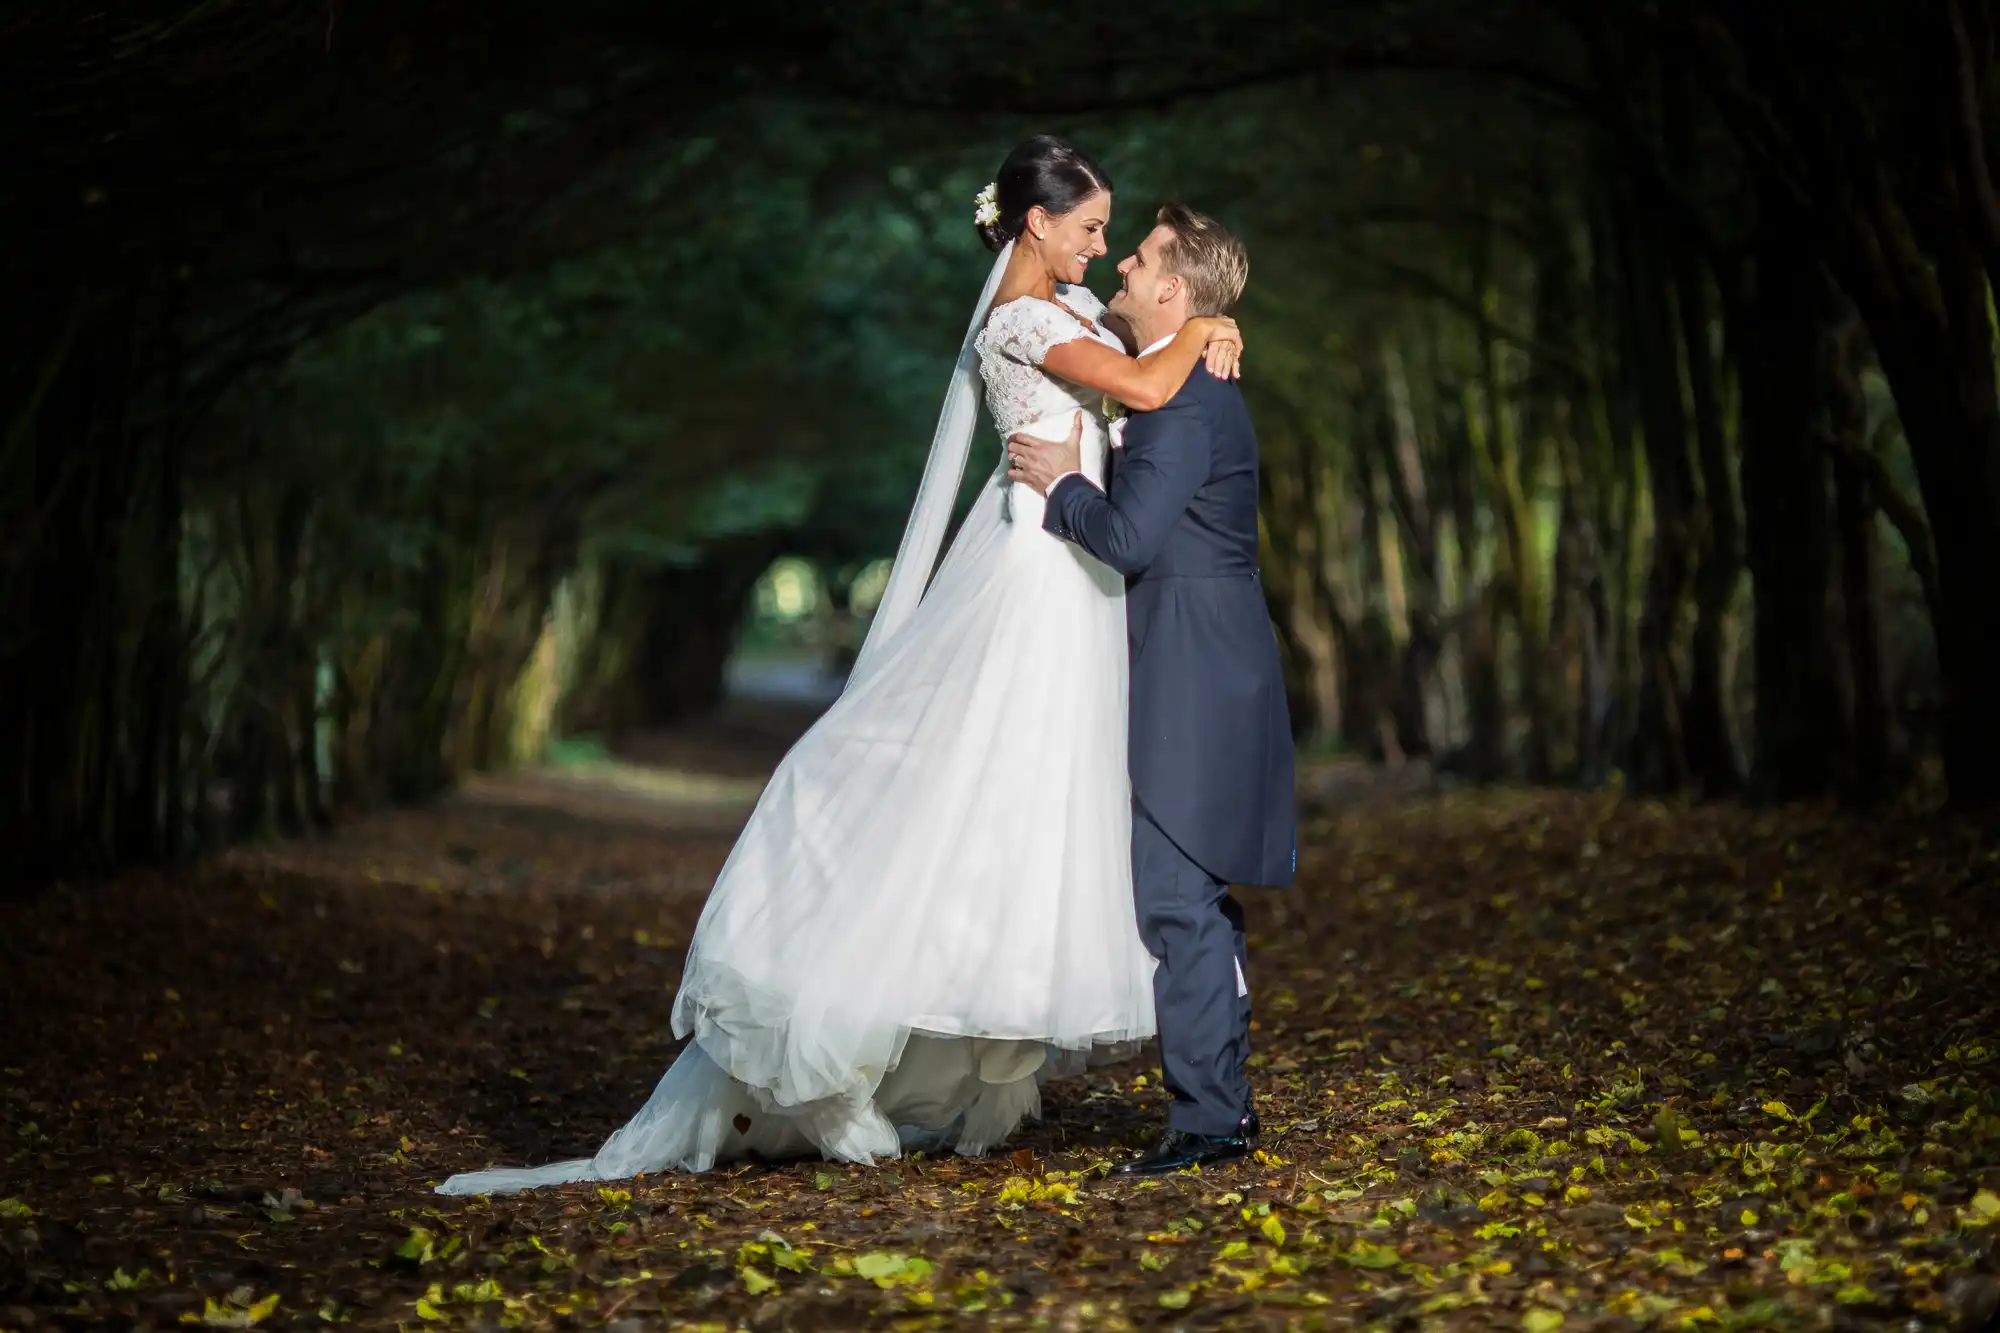 A bride and groom share a loving embrace in a forest pathway, surrounded by trees and fallen leaves, with soft lighting highlighting their joyful expressions.